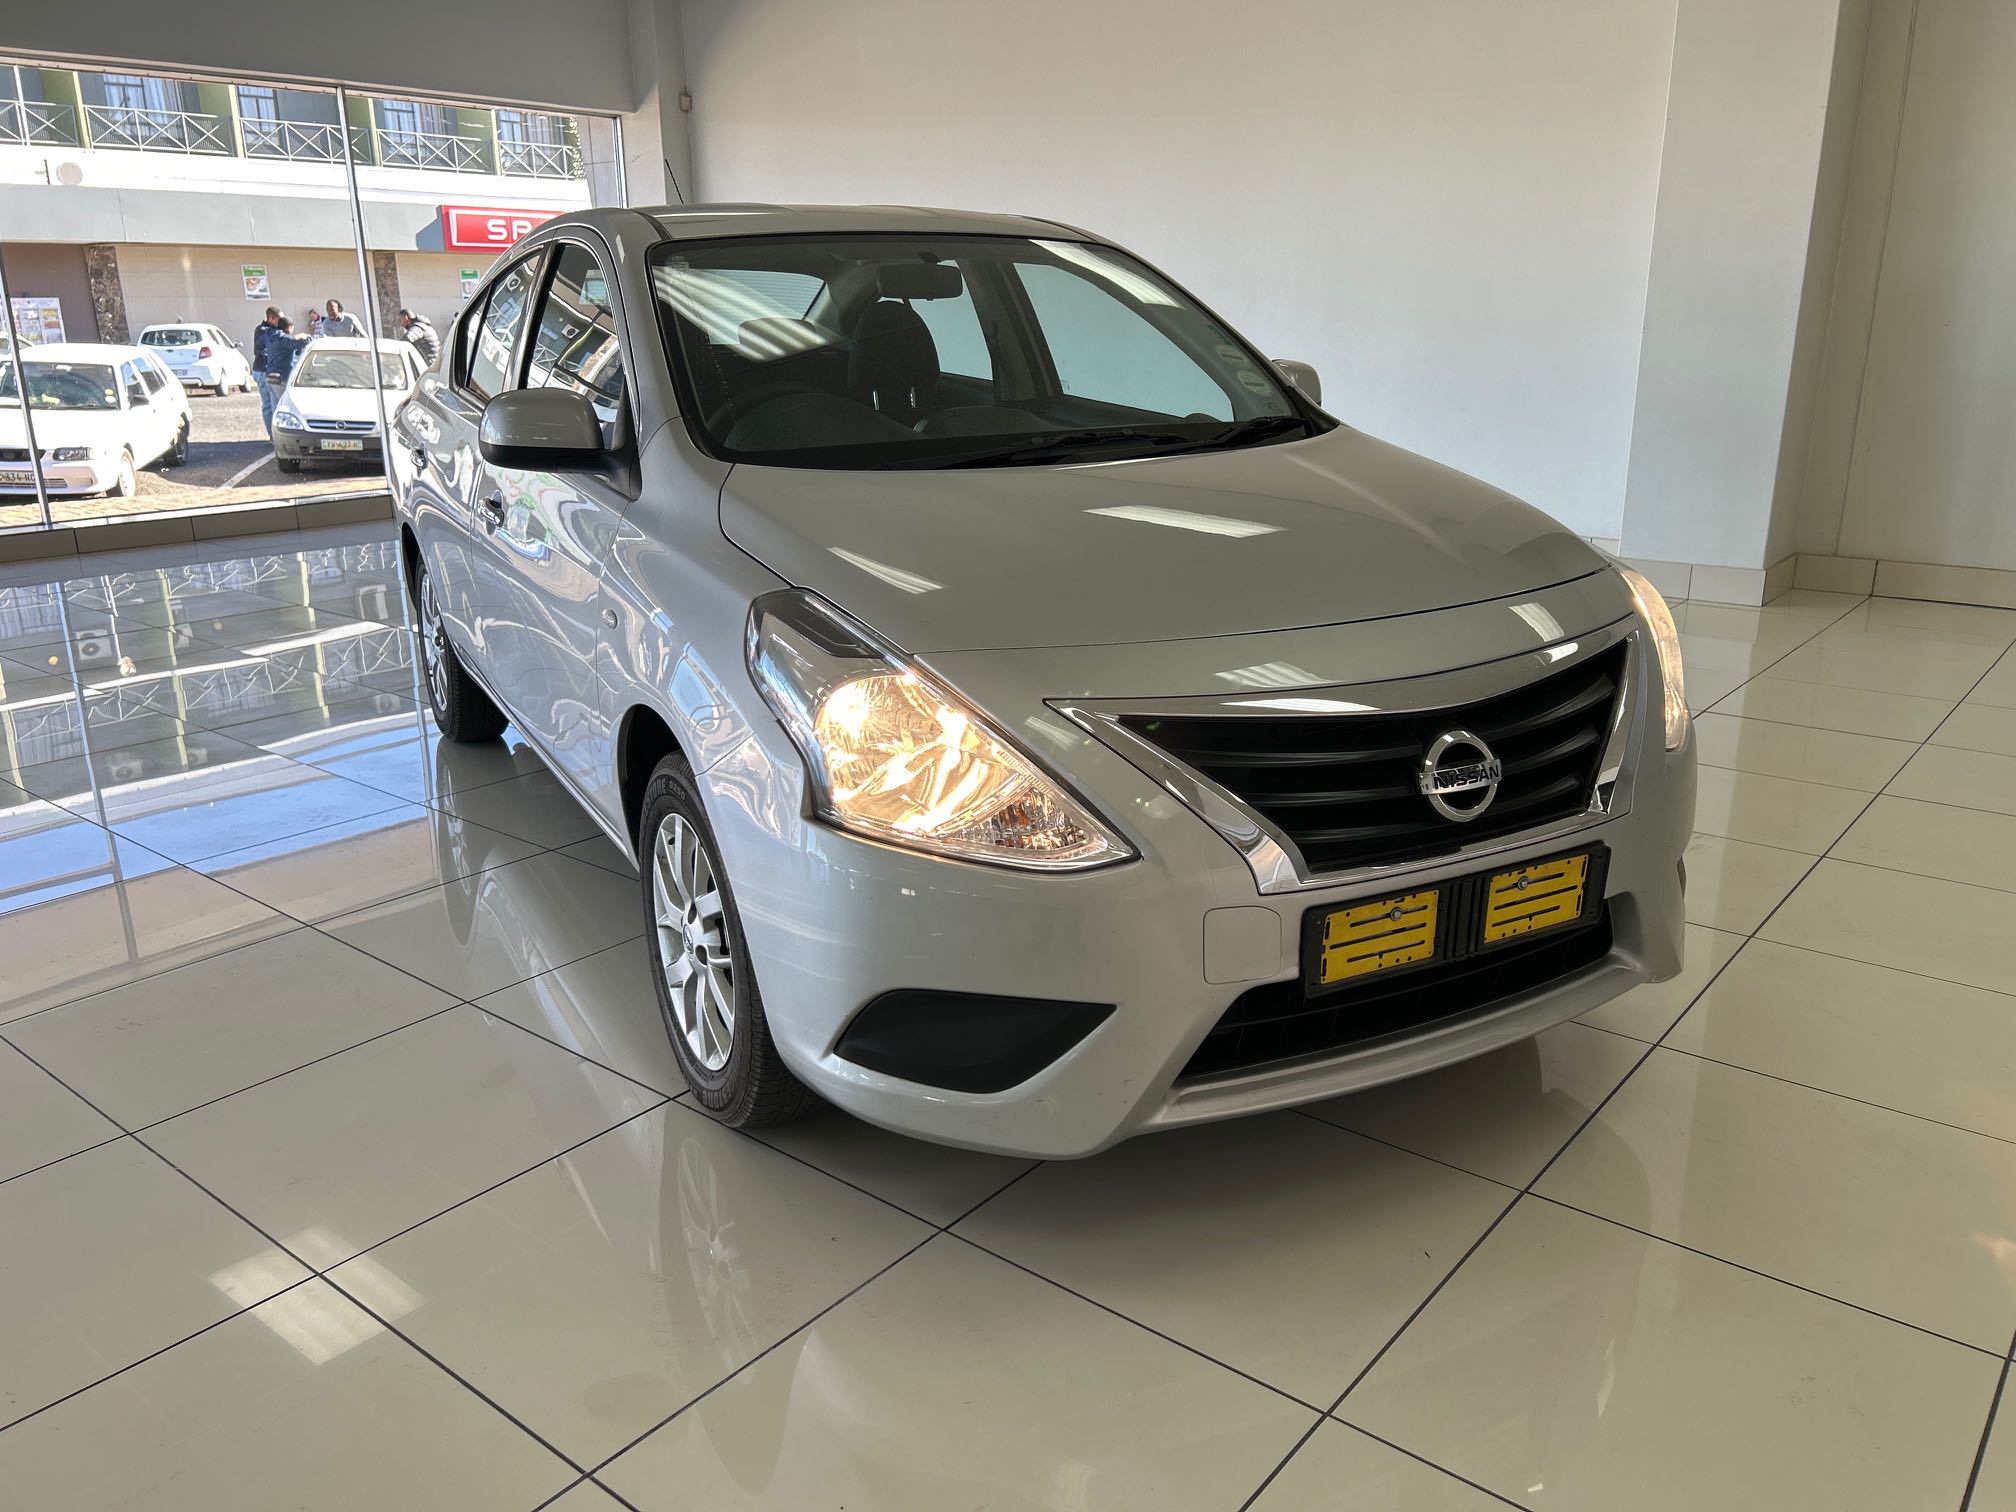 NISSAN Almera for Sale in South Africa